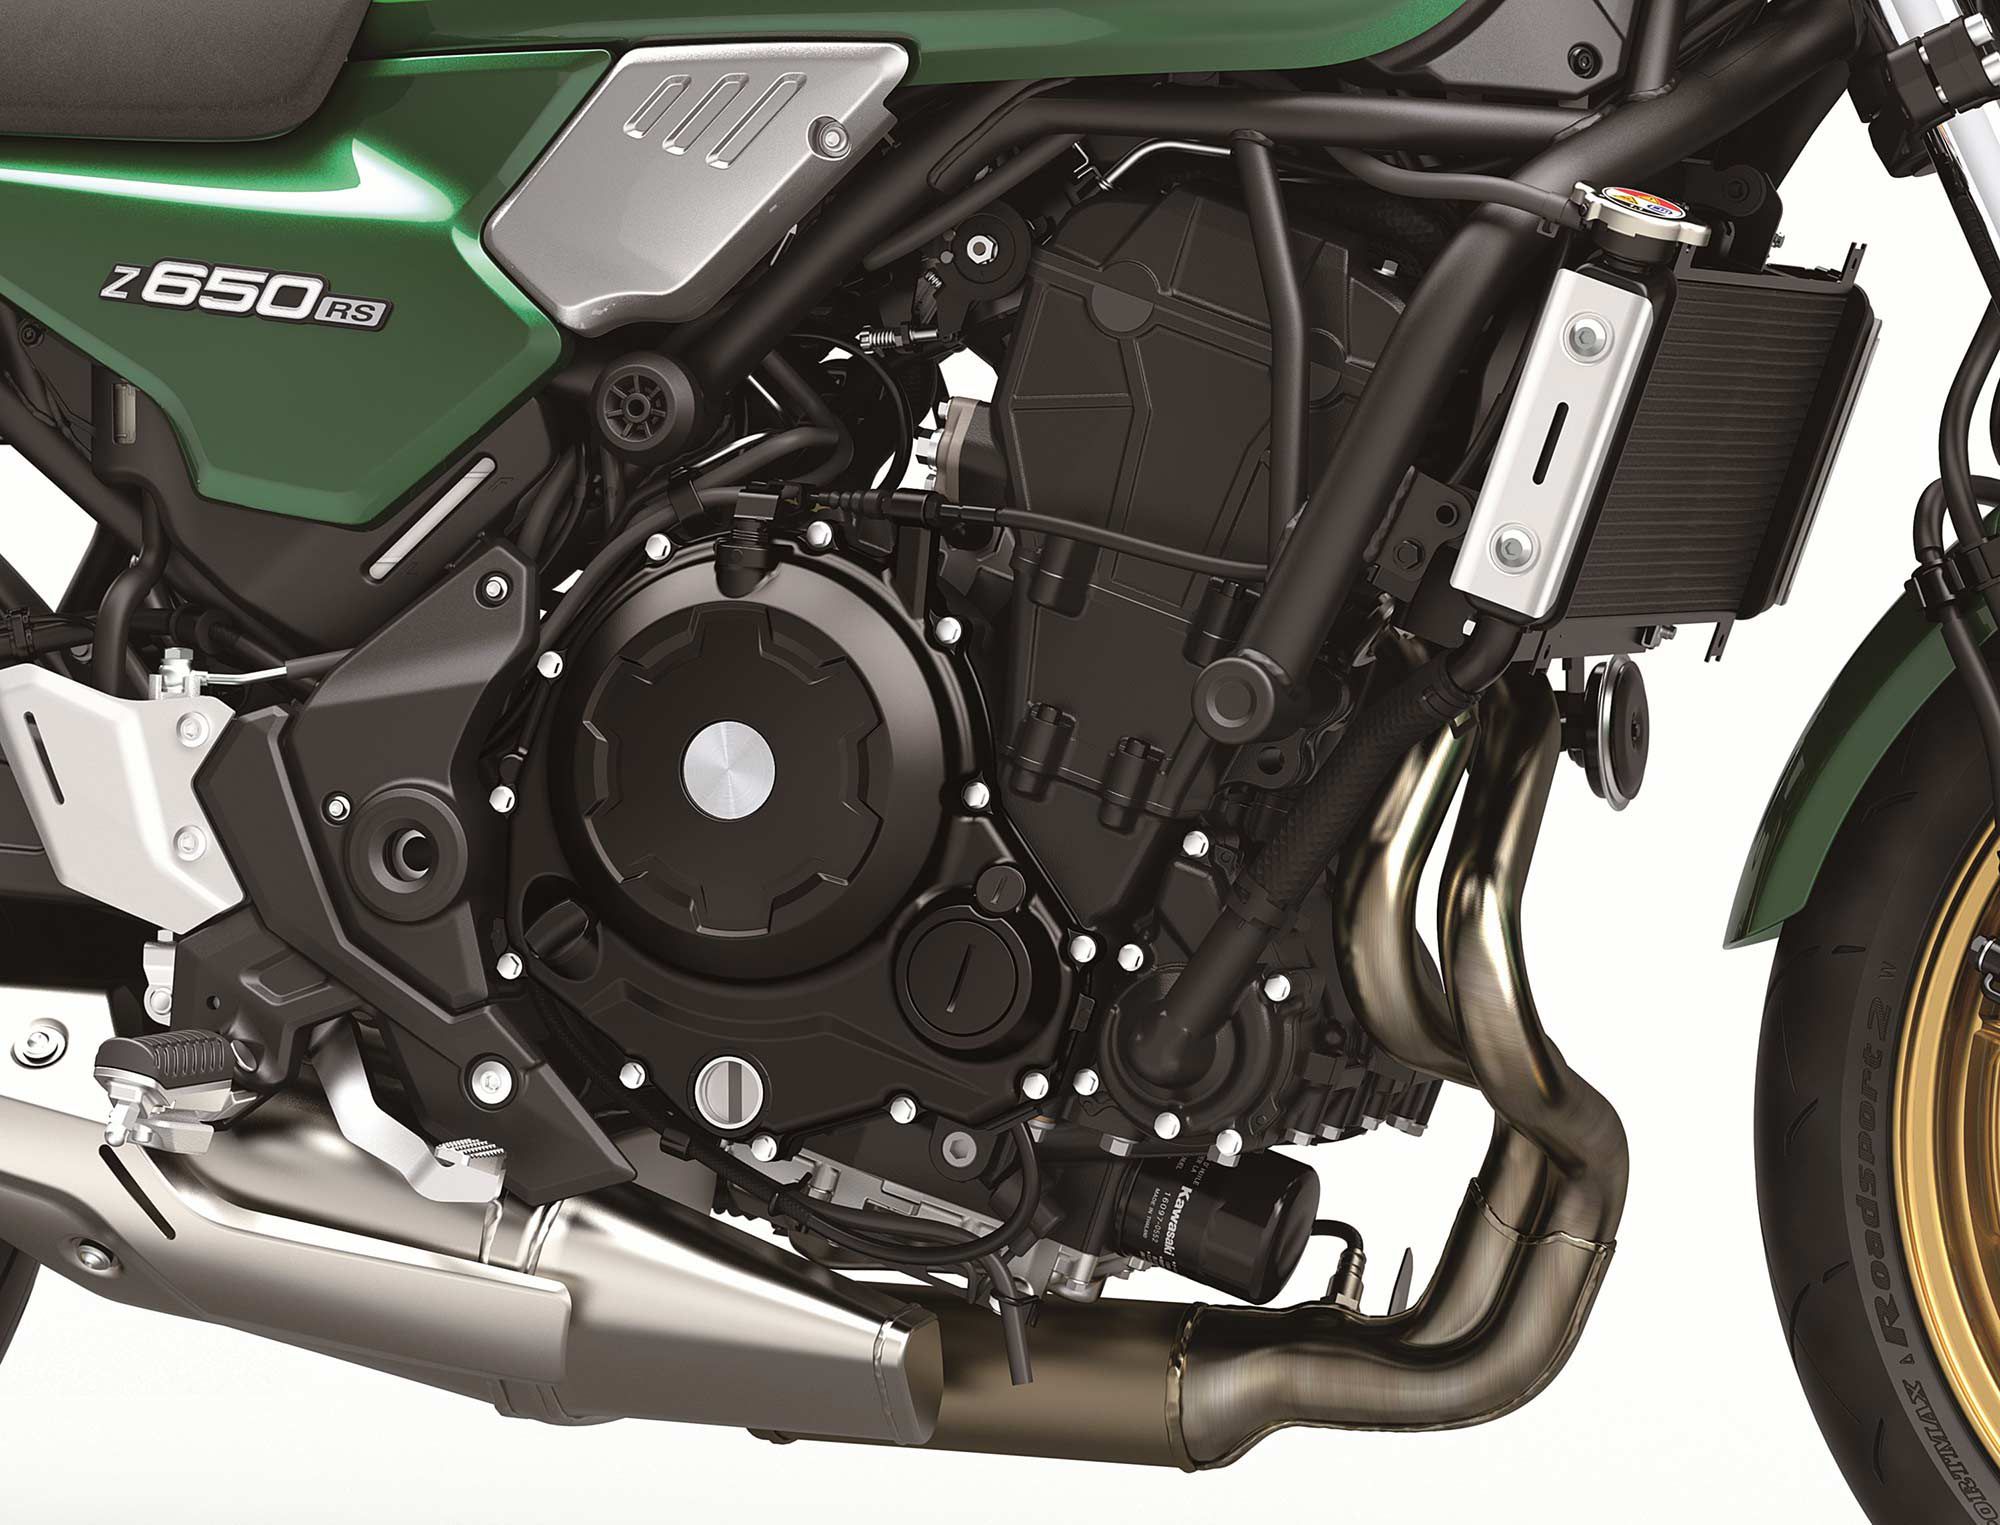 Kawasaki makes use of its tried-and-true 649cc parallel-twin engine.